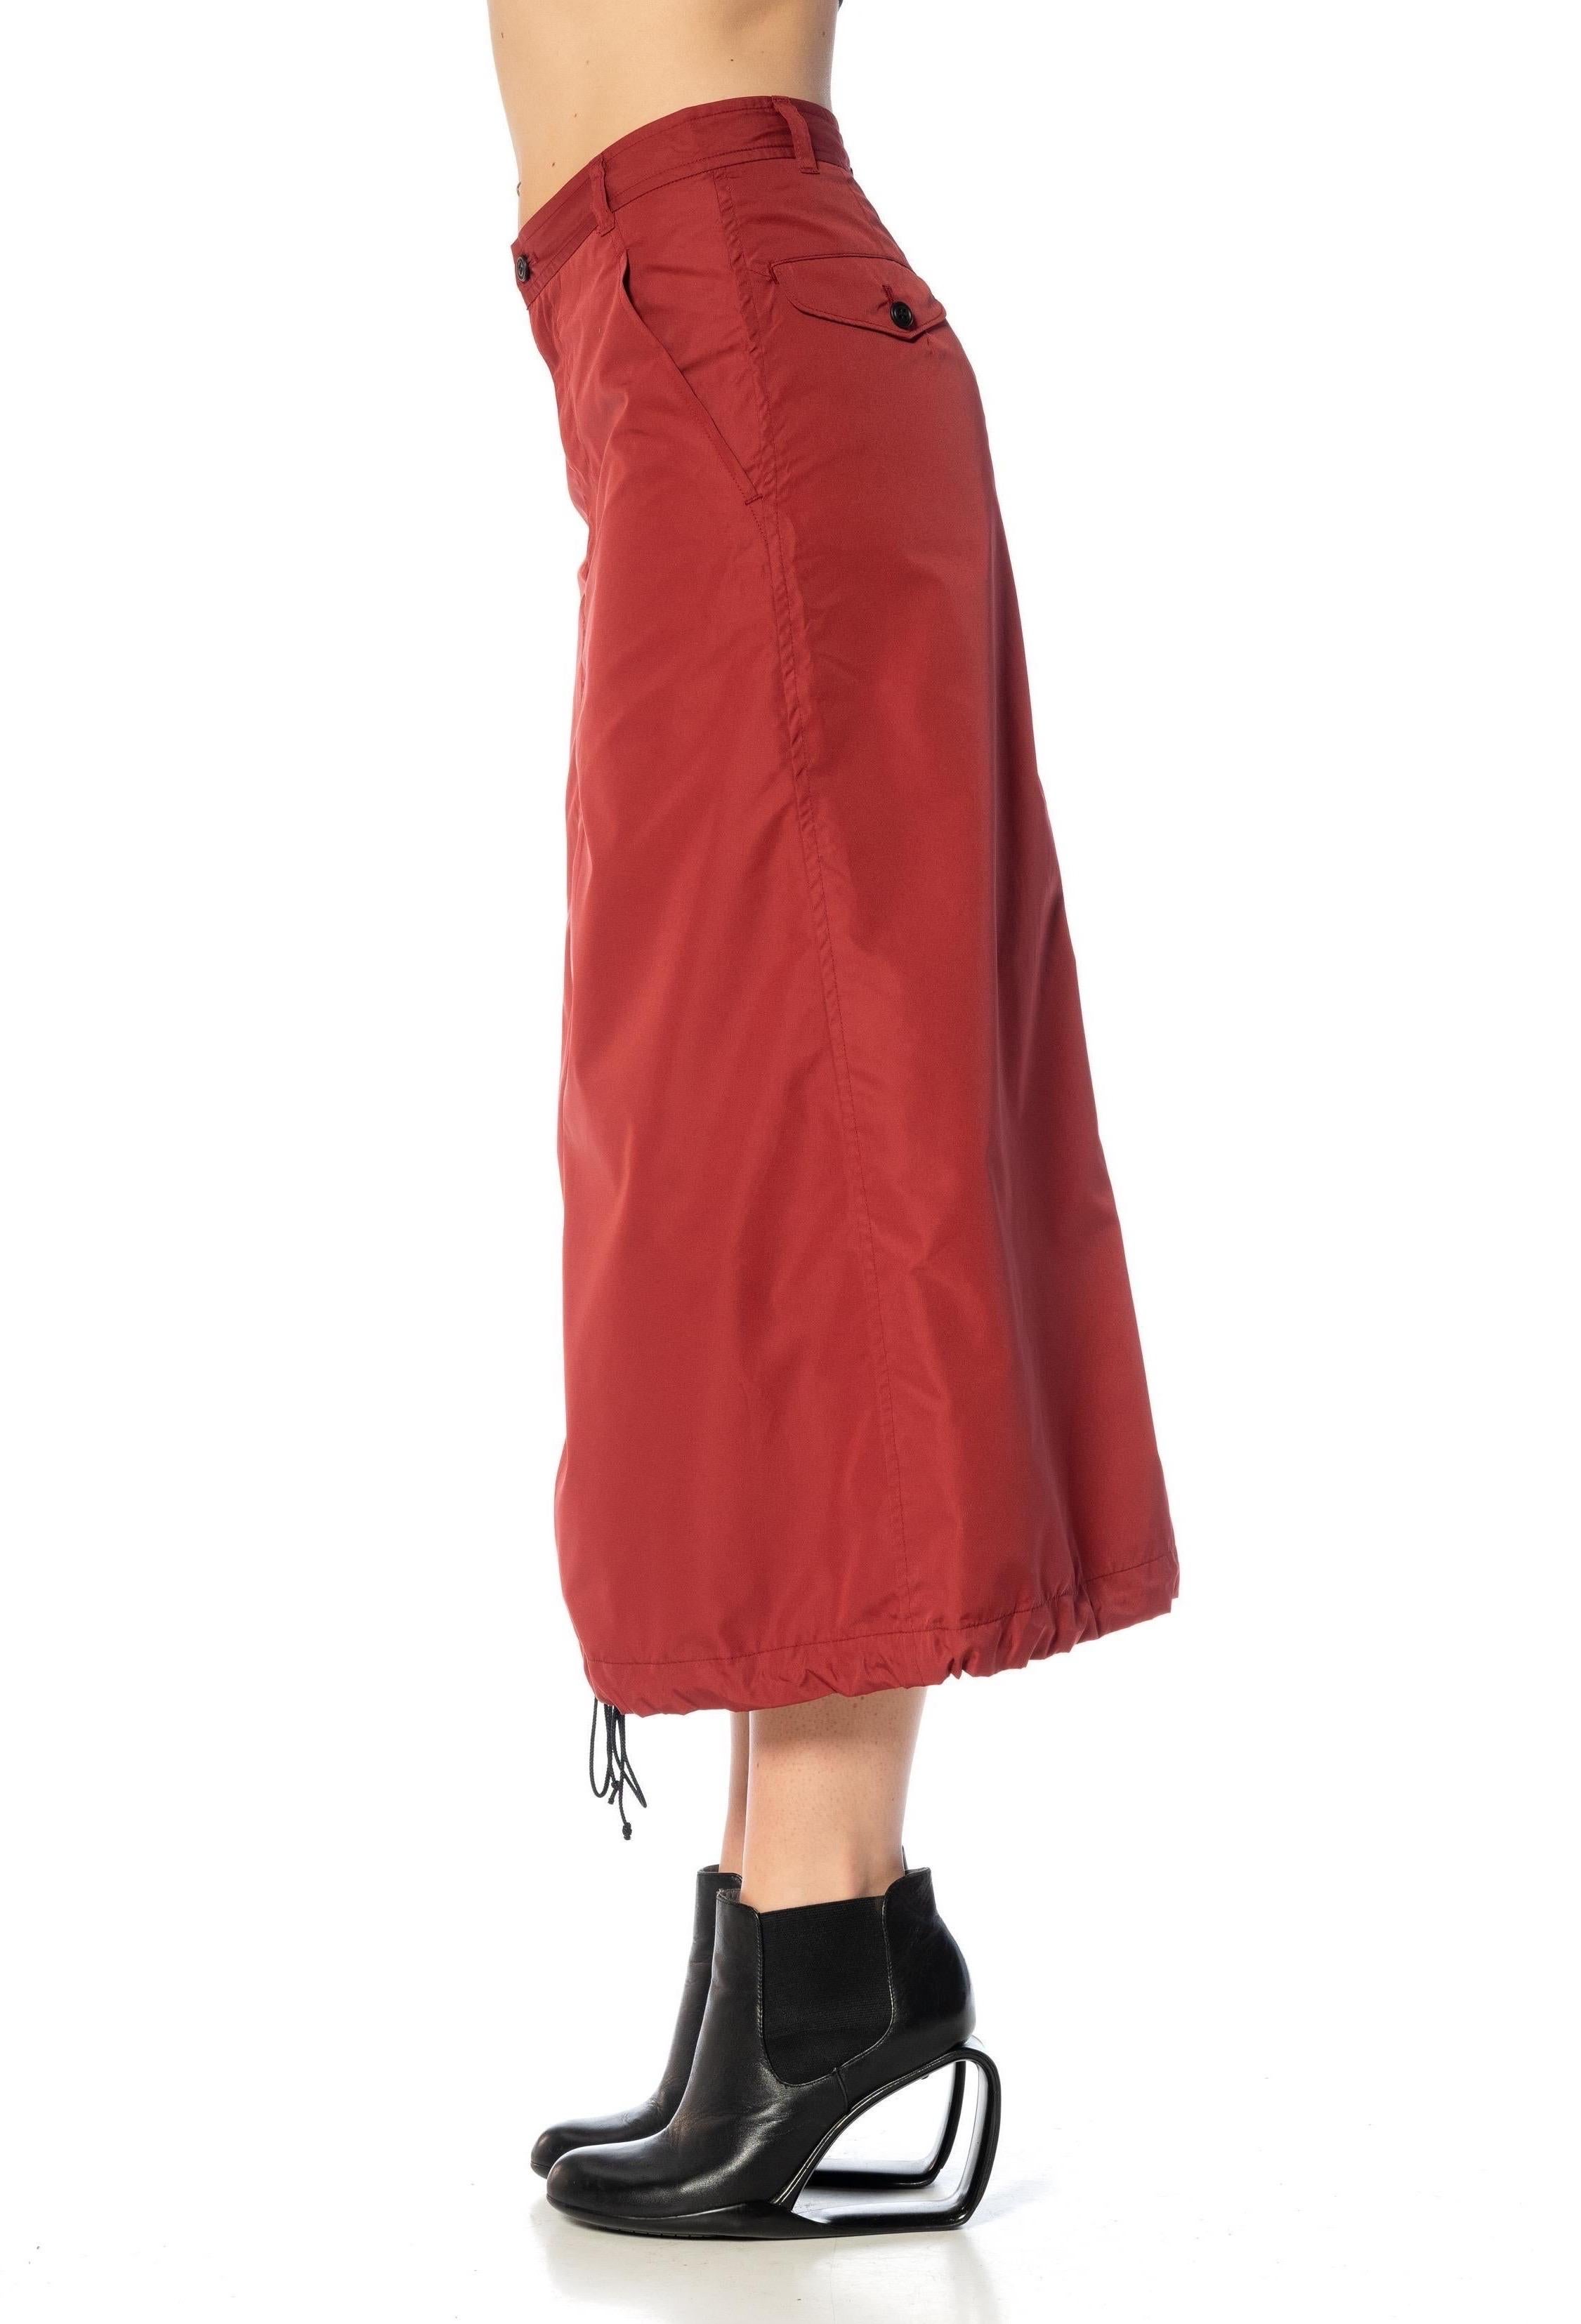 2000S COMME DES GARCONS Burgundy Polyester Parachute Skirt With Drawstring Hem  In Excellent Condition For Sale In New York, NY